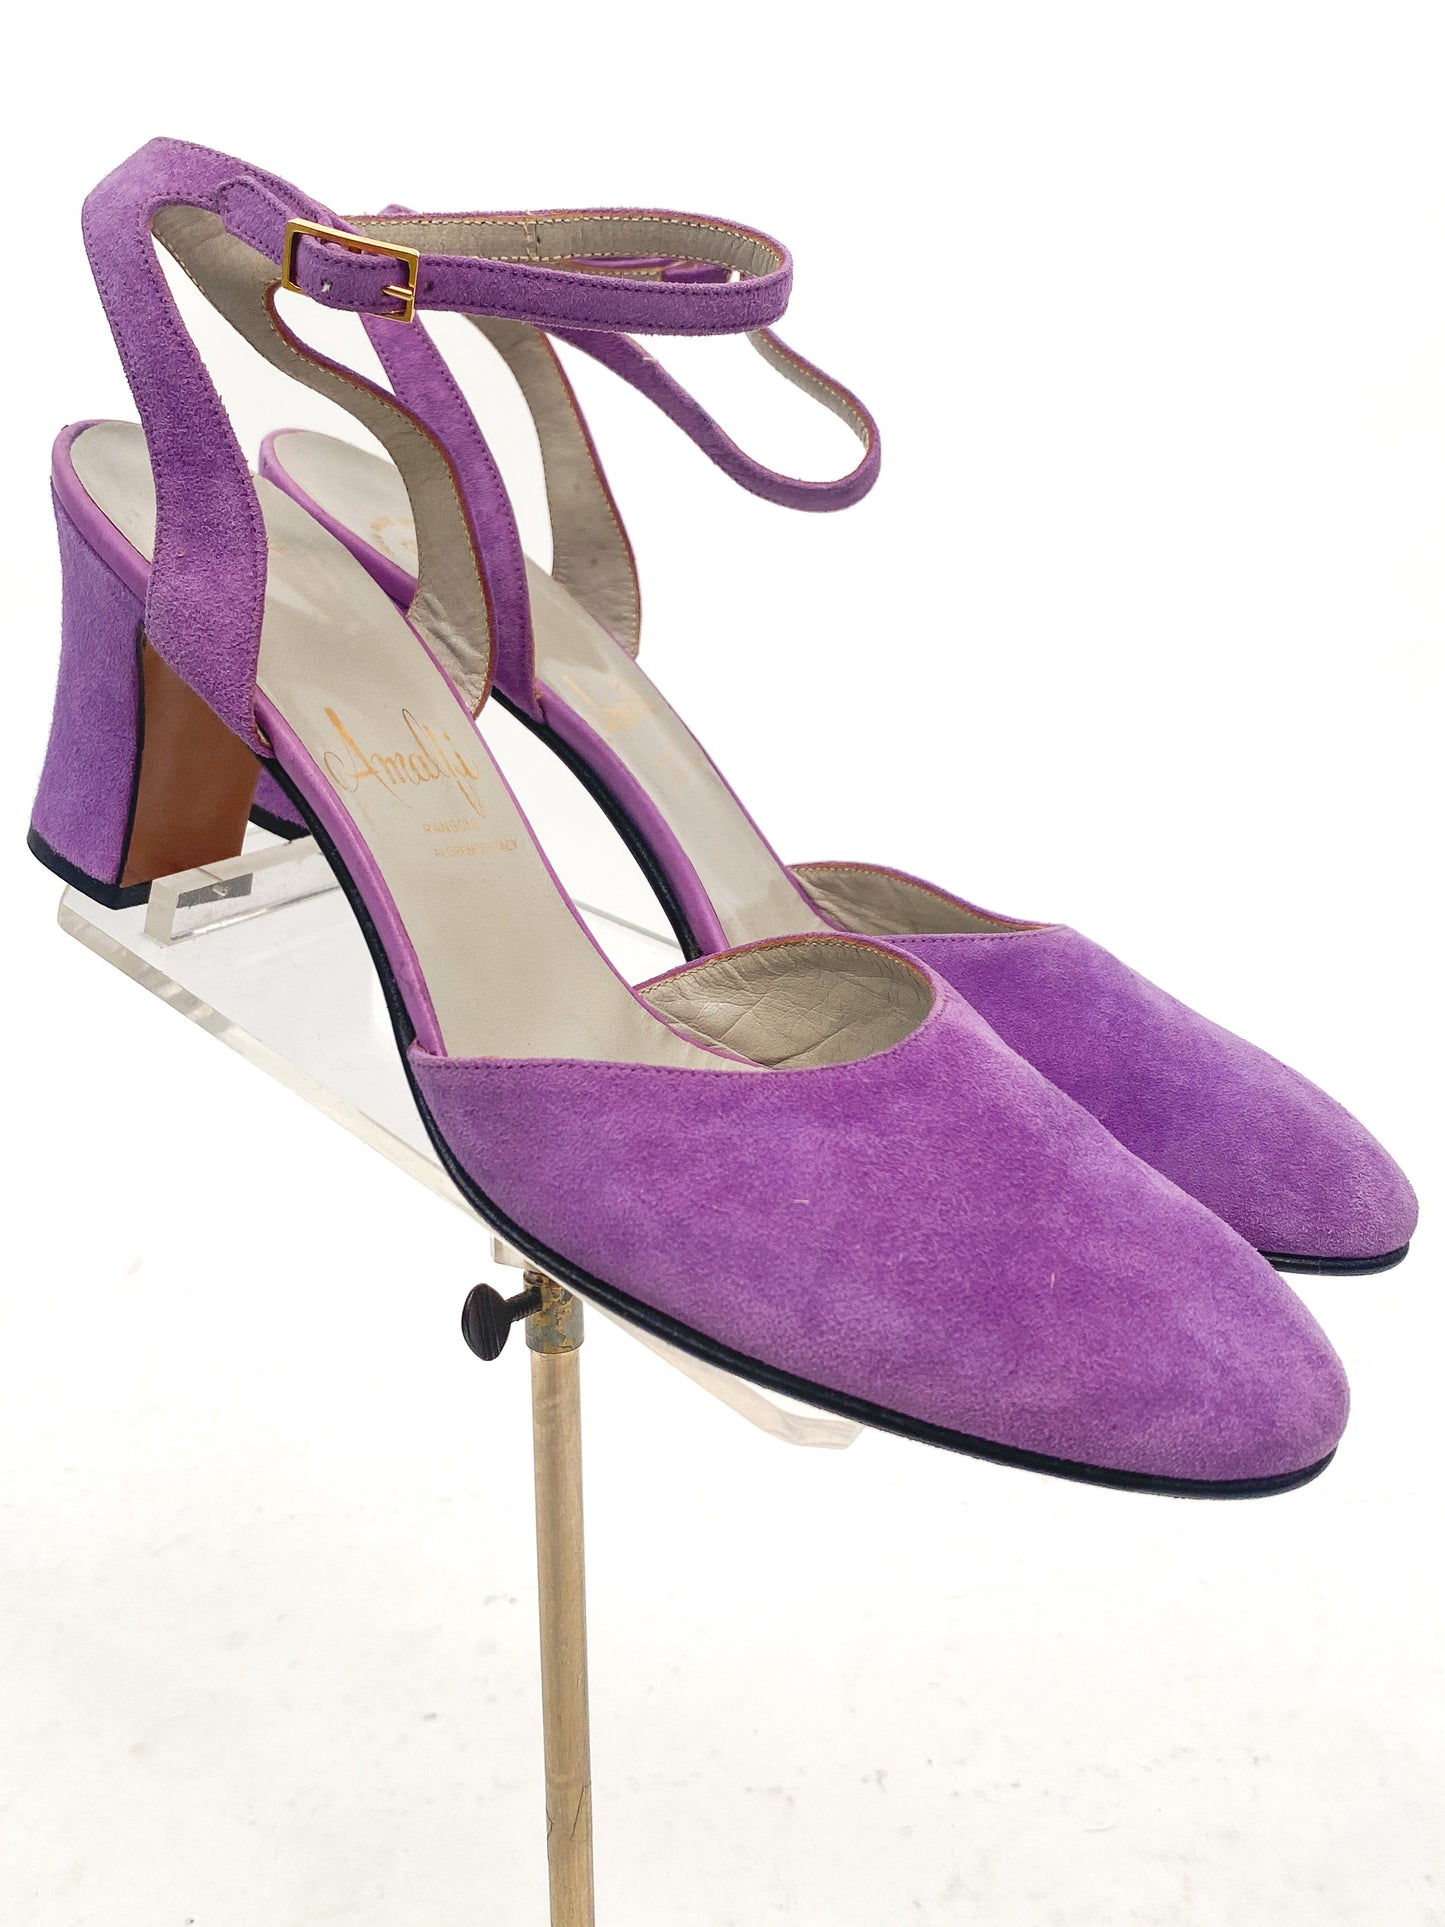 1960-70s Lilac Suede Pumps with Ankle Strap / Size 9.5 N